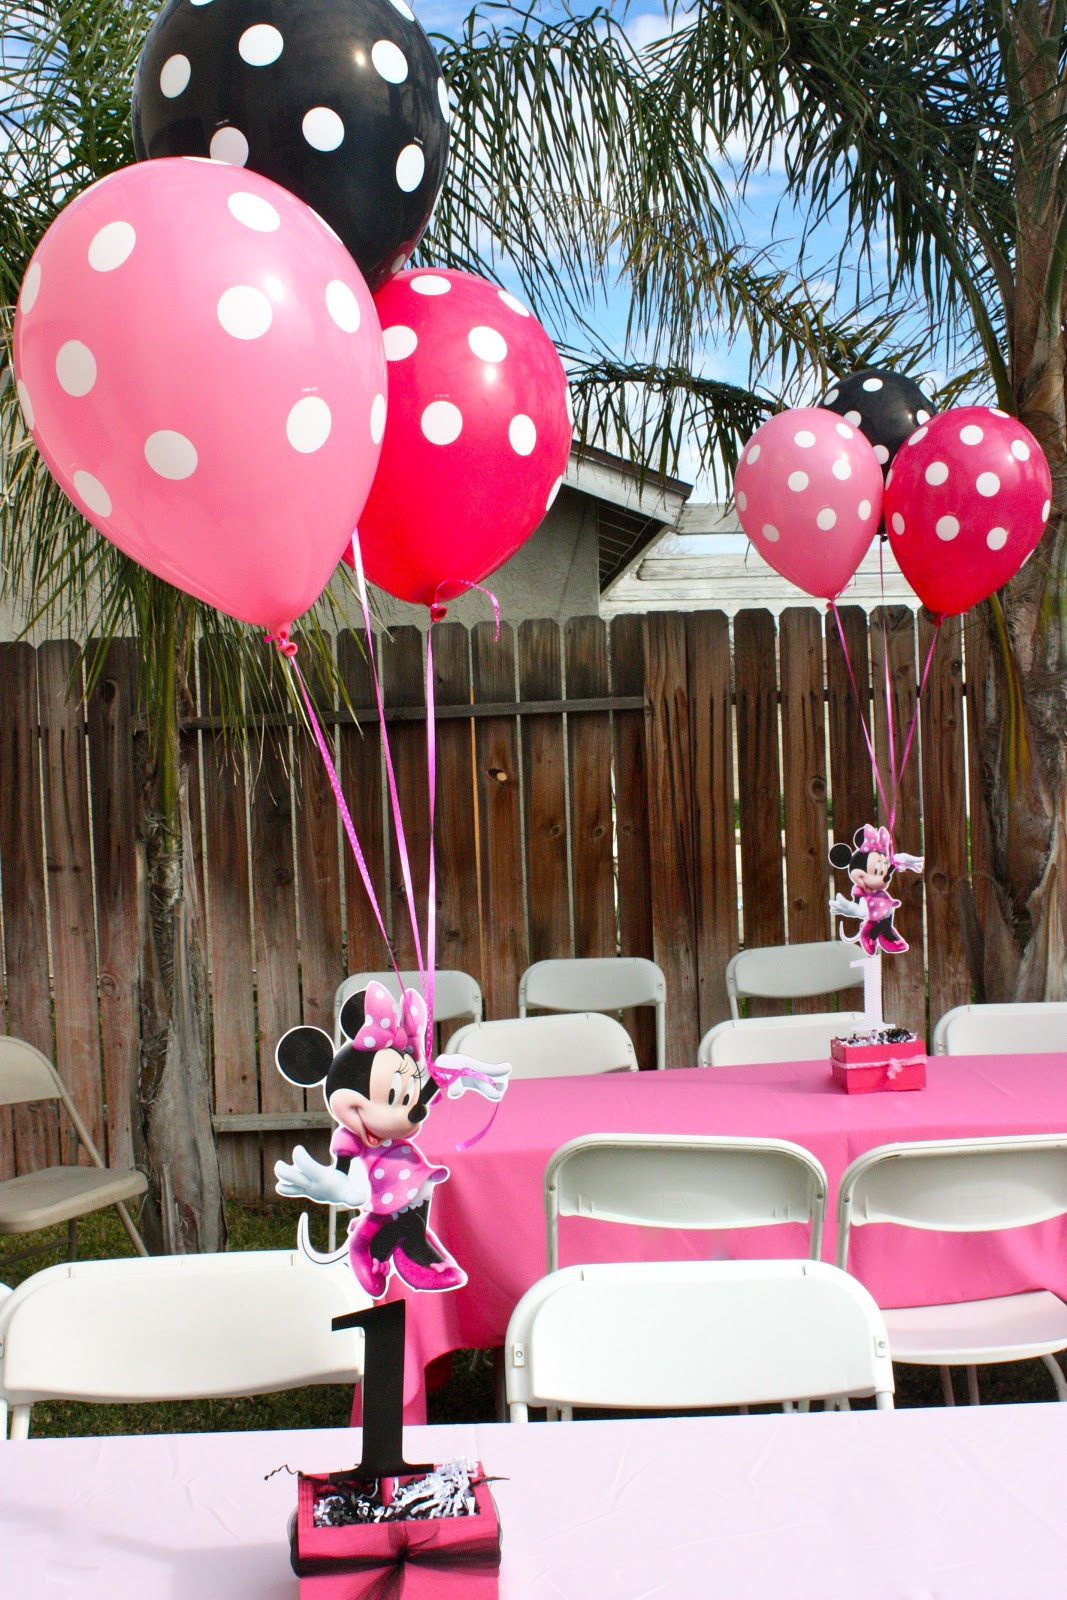 Minnie Mouse Birthday Decorations Red
 tini Sophia s 1st Birthday Minnie Mouse Party